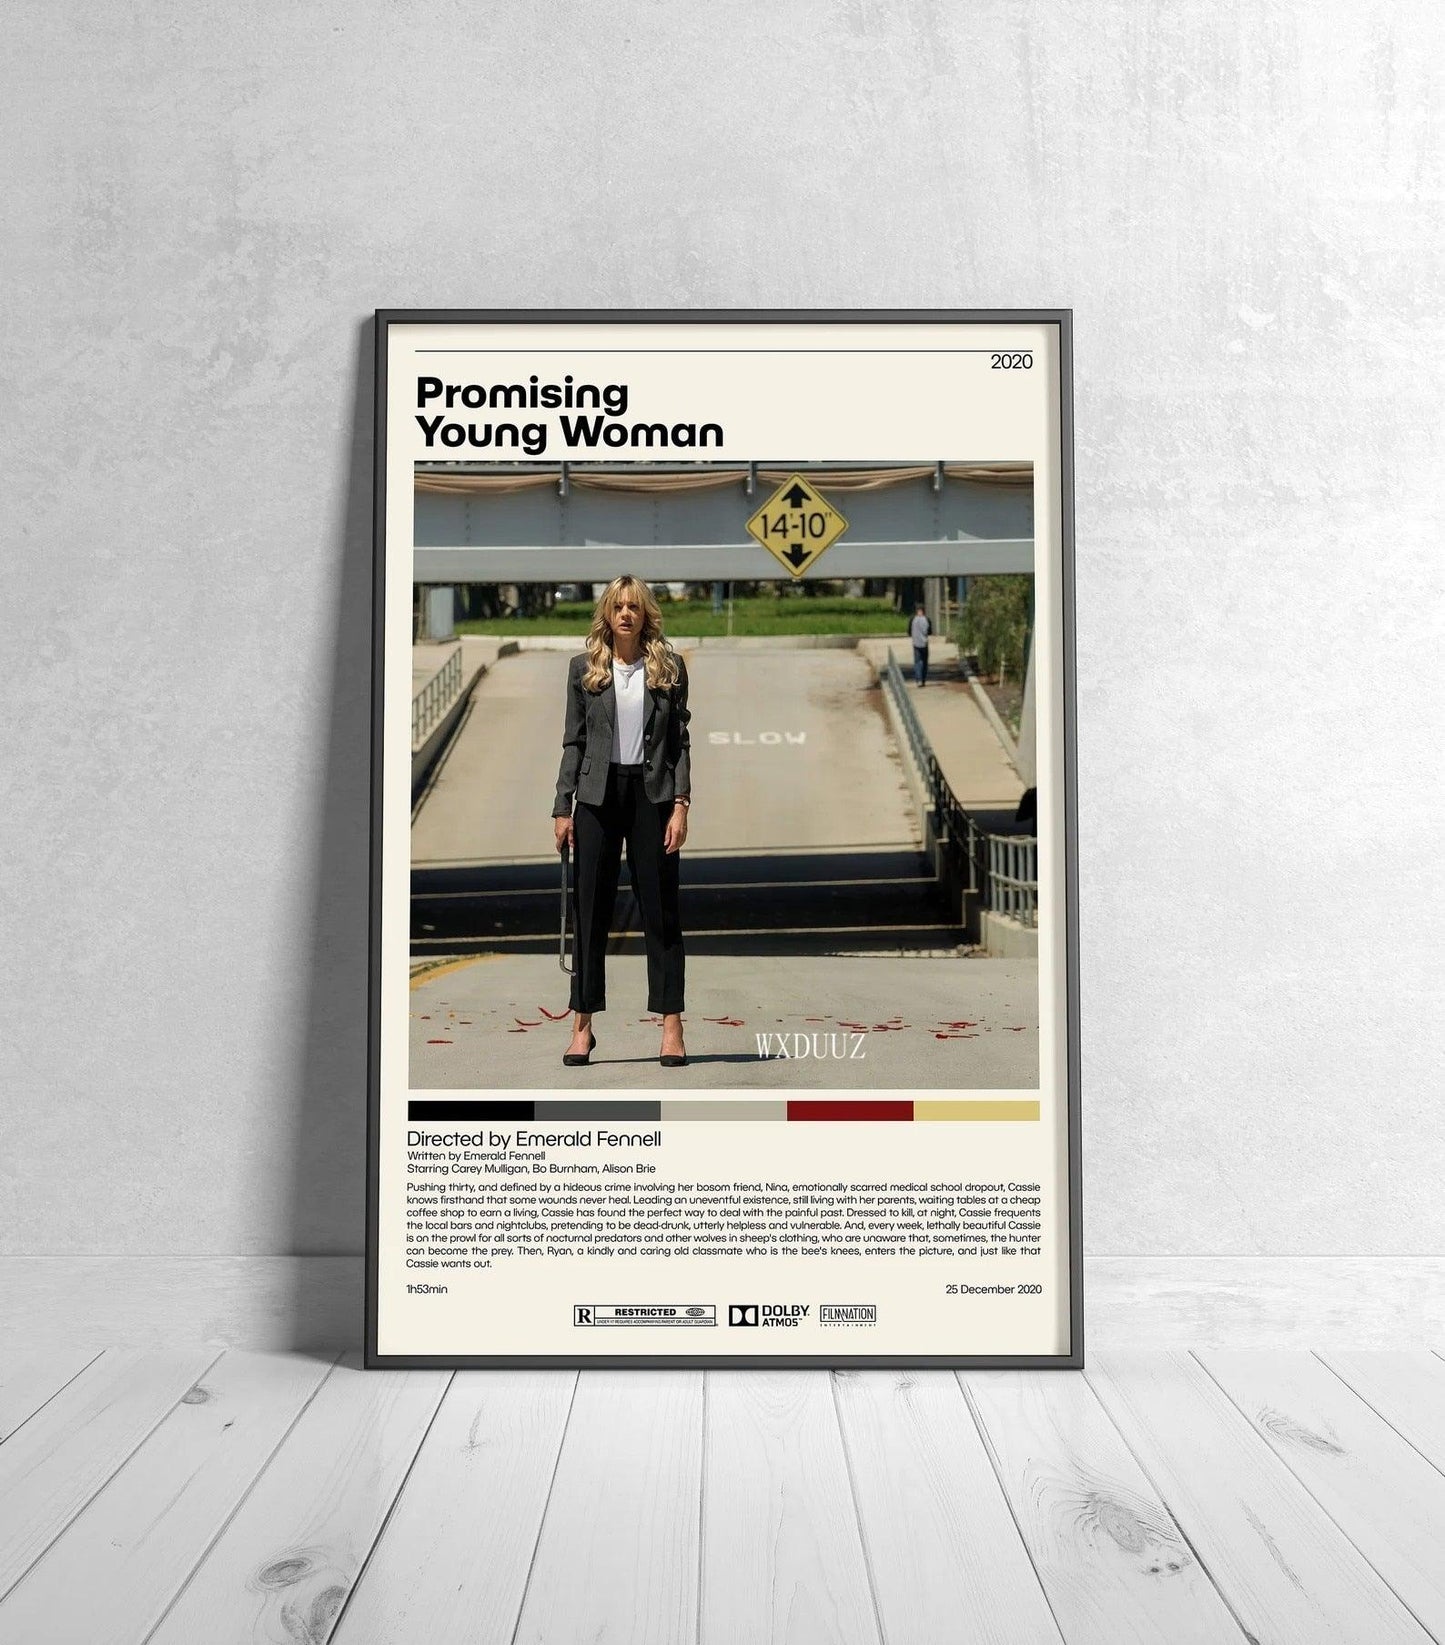 Promising Young Woman Minimalist Movie Poster - Aesthetic Wall Decor